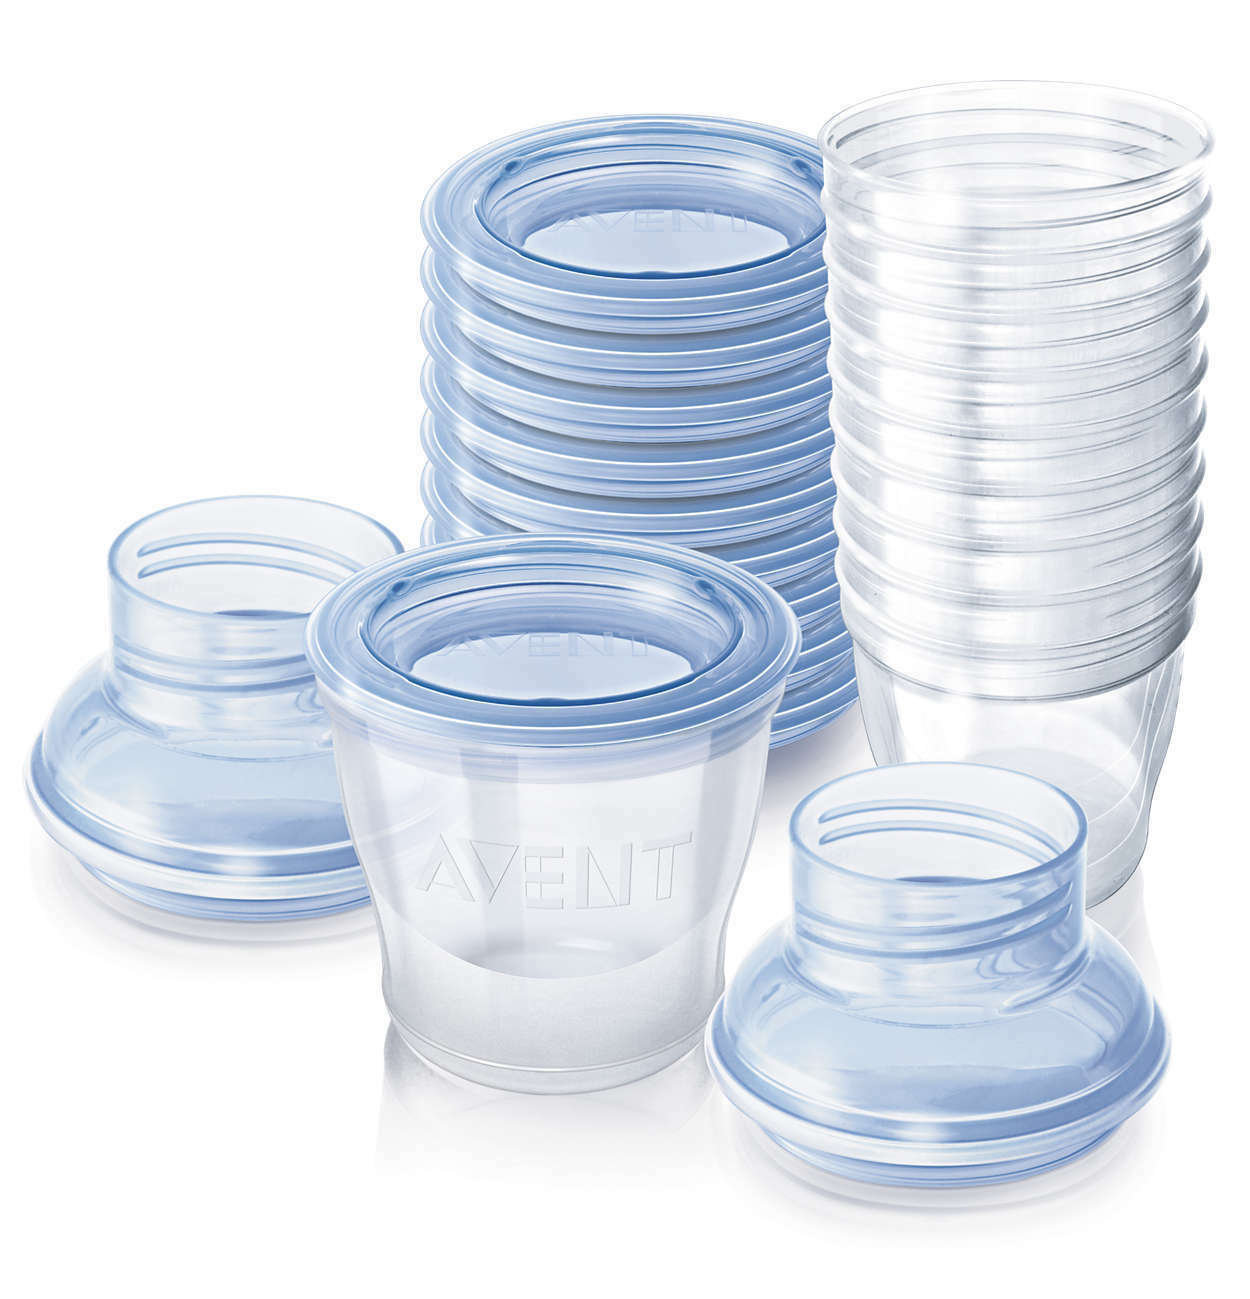 Avent Naturally pre sterilized disposable Milk Storage Kit for ISIS Breast pump - $18.59